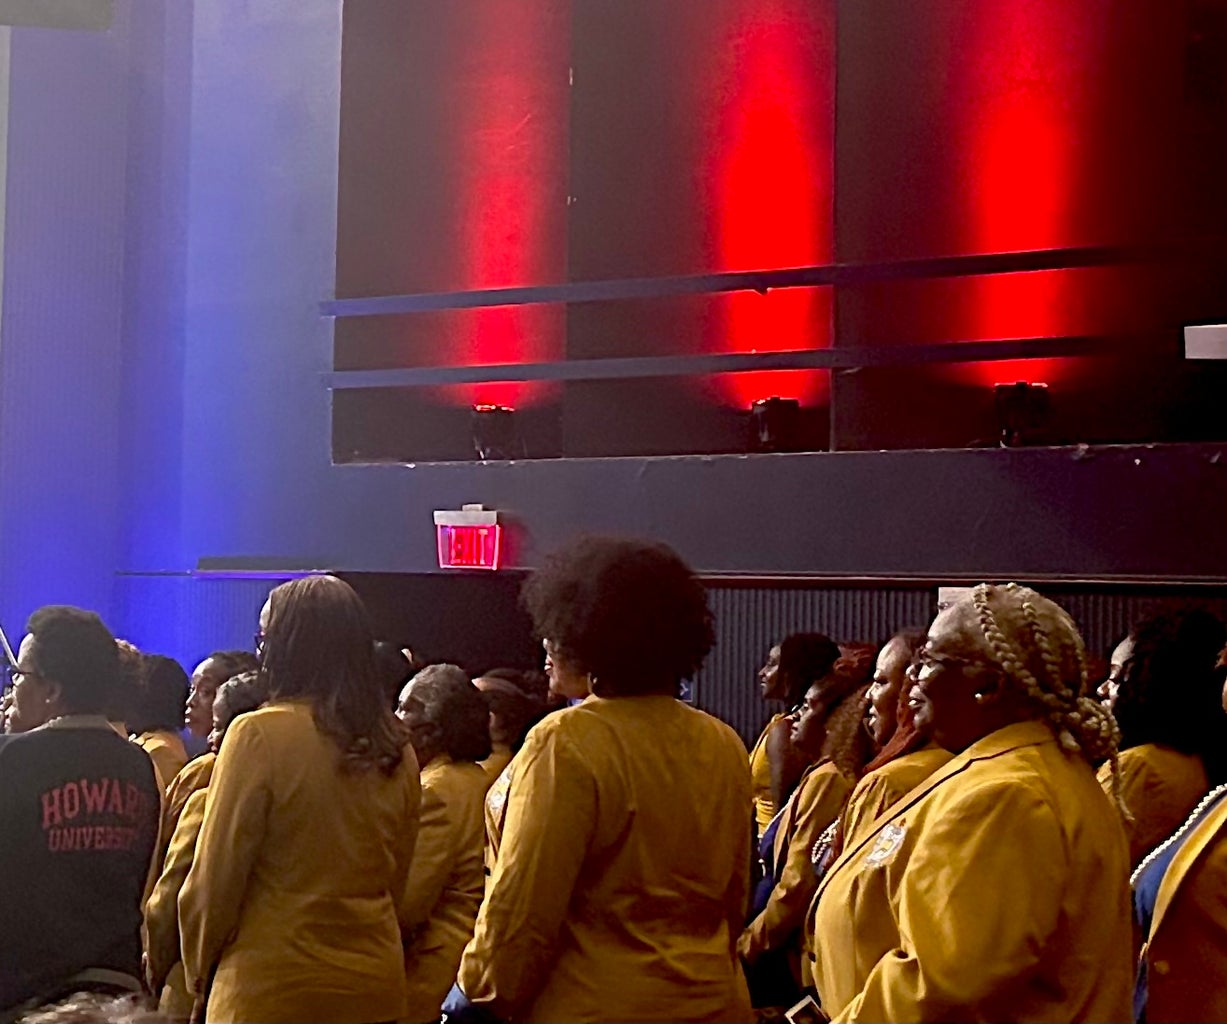 Sigma Gamma Rho members stand to be recognized and celebrated by audience attendees.